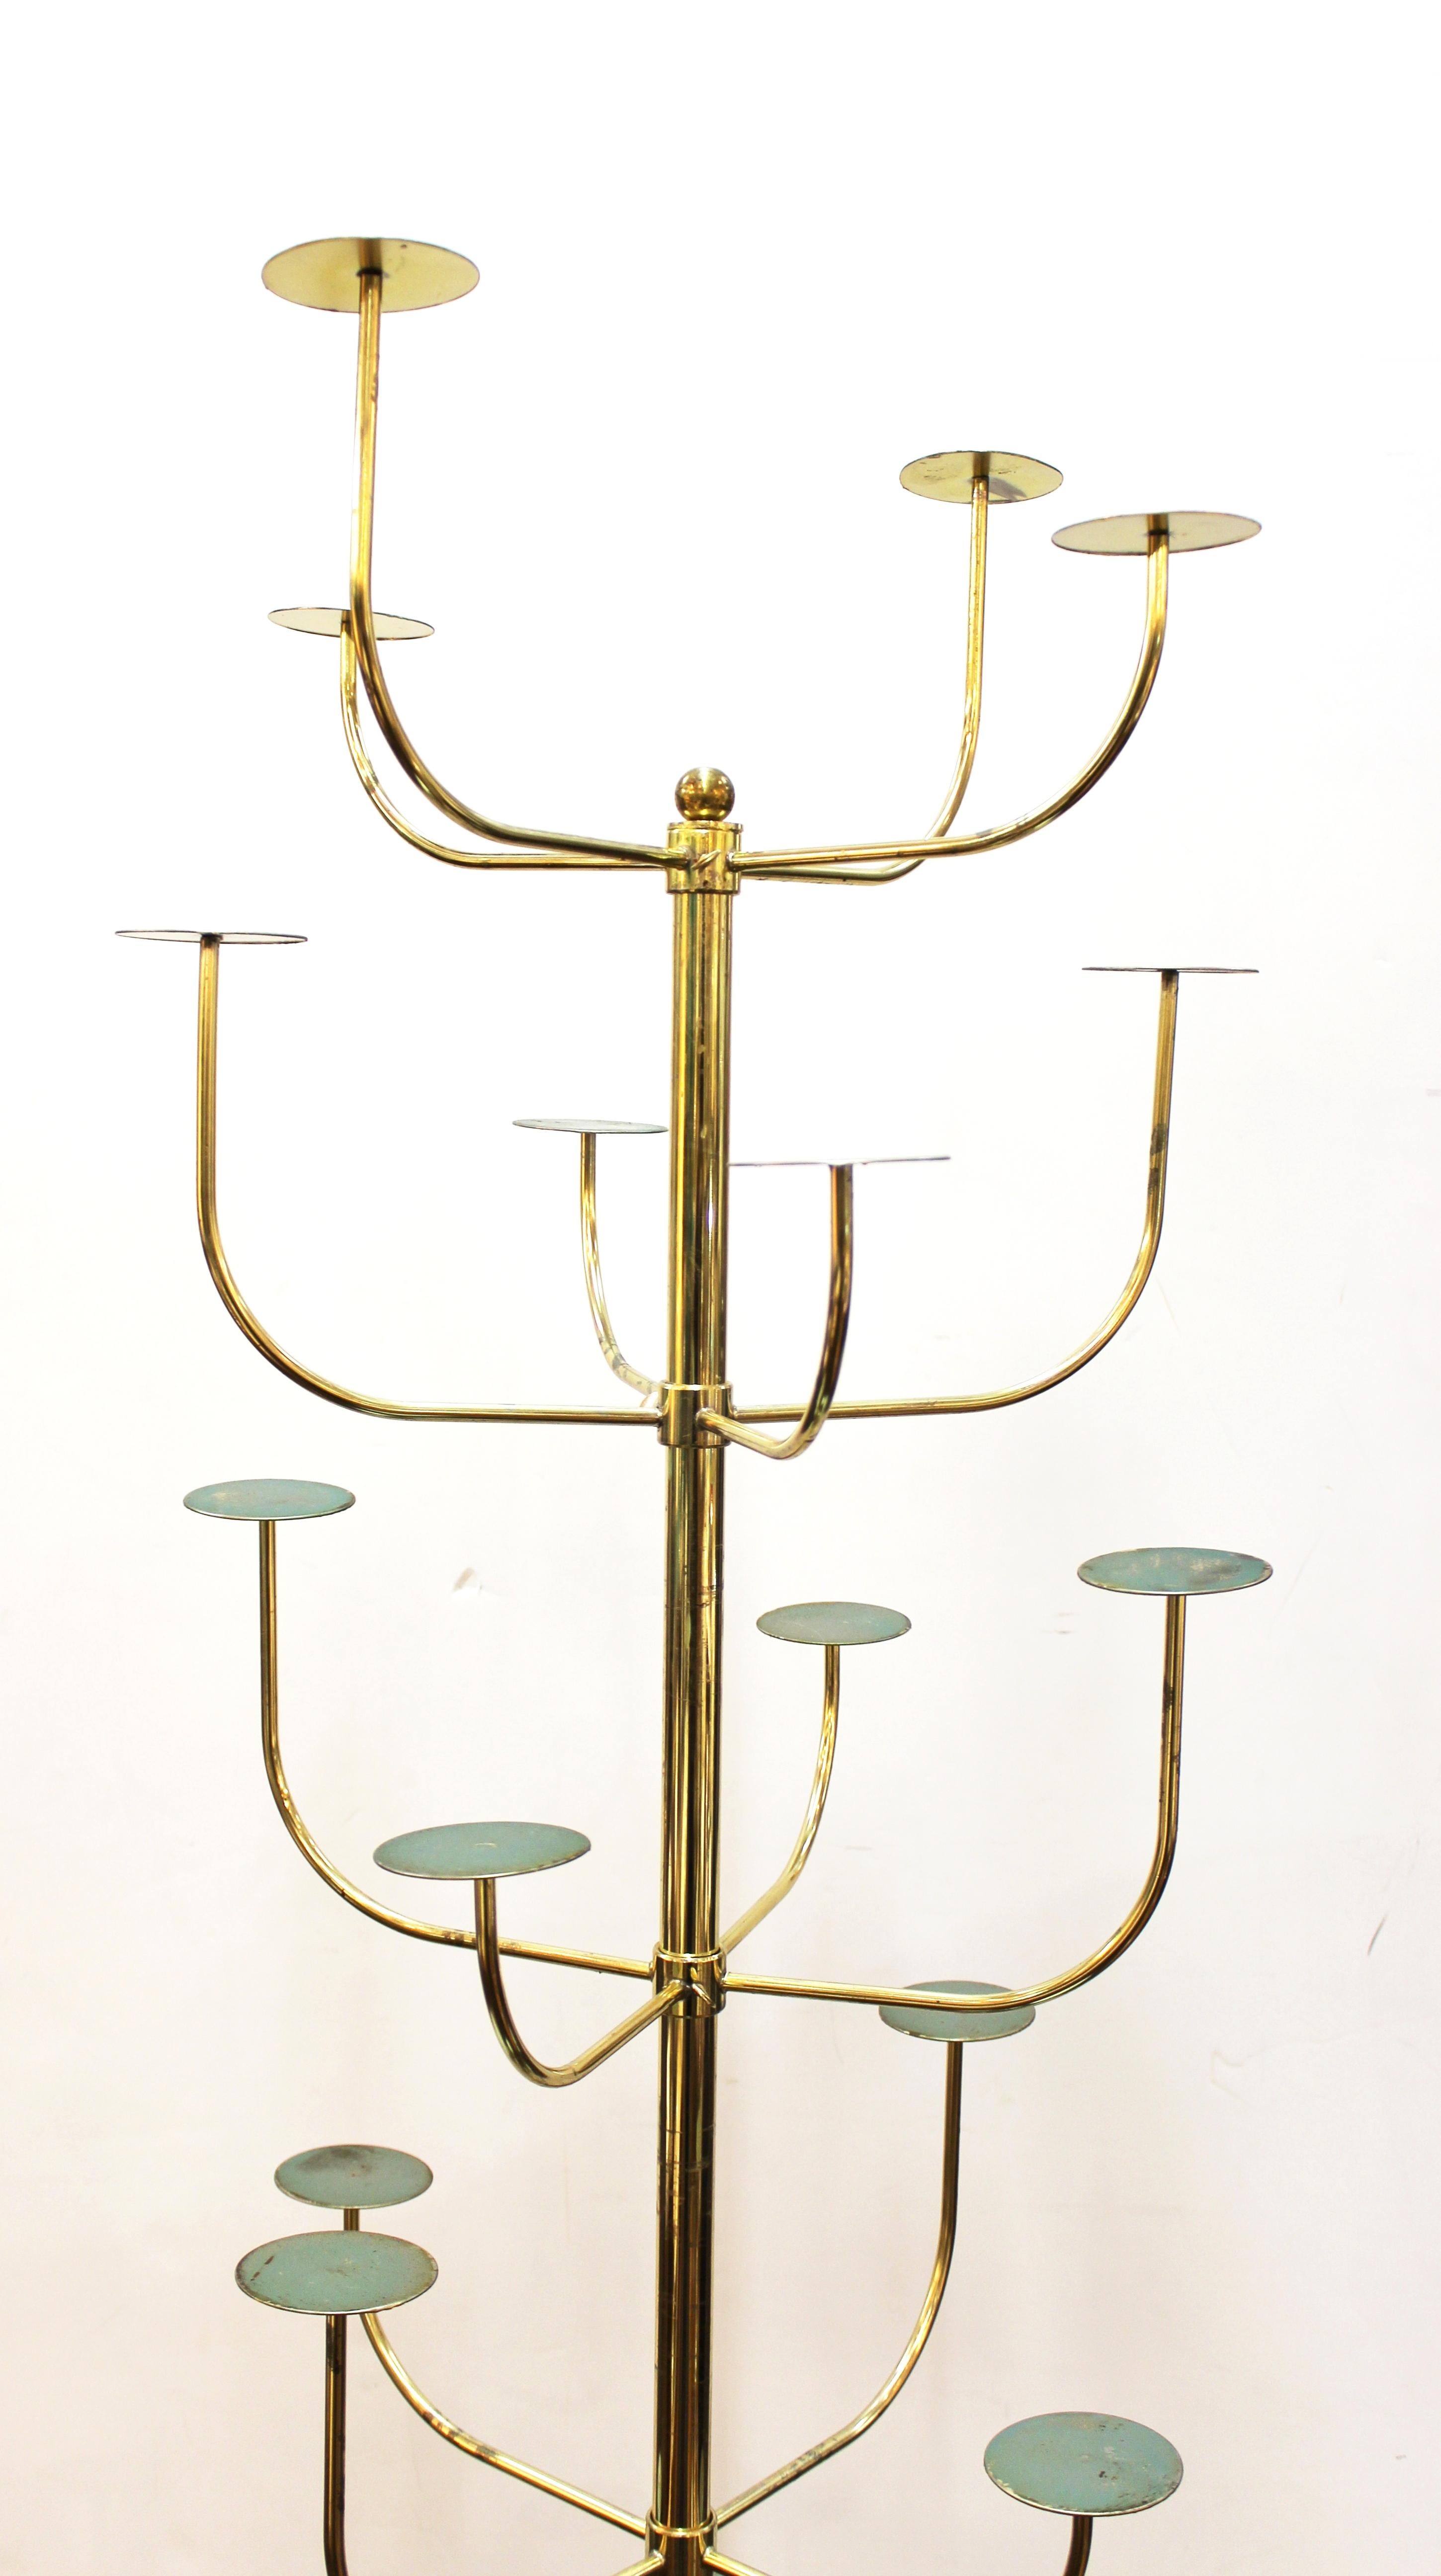 Art Deco rotating and adjustable brass hat stand, made in the United States during the 1940s. The piece has six tiers and can hold a total of 24 hats for display. In very good vintage condition with some minor age-appropriate wear to the patina.